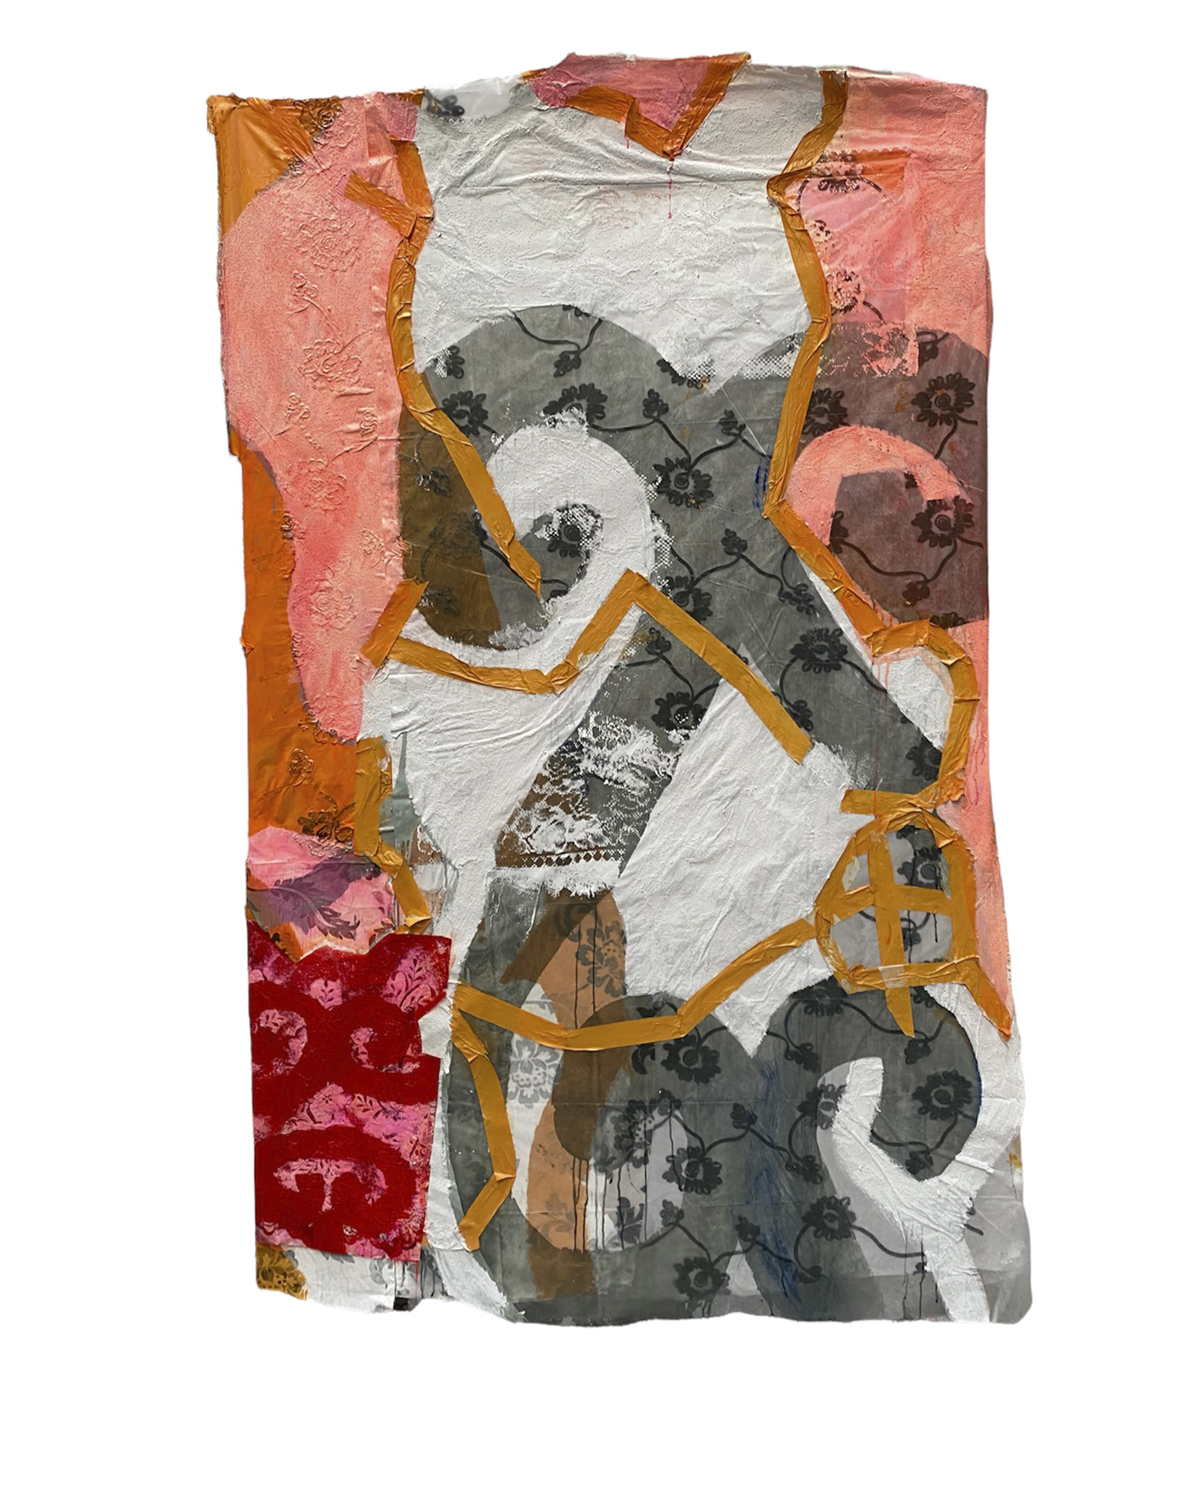 A n abstract collage in a Fleur-de-lys pattern.